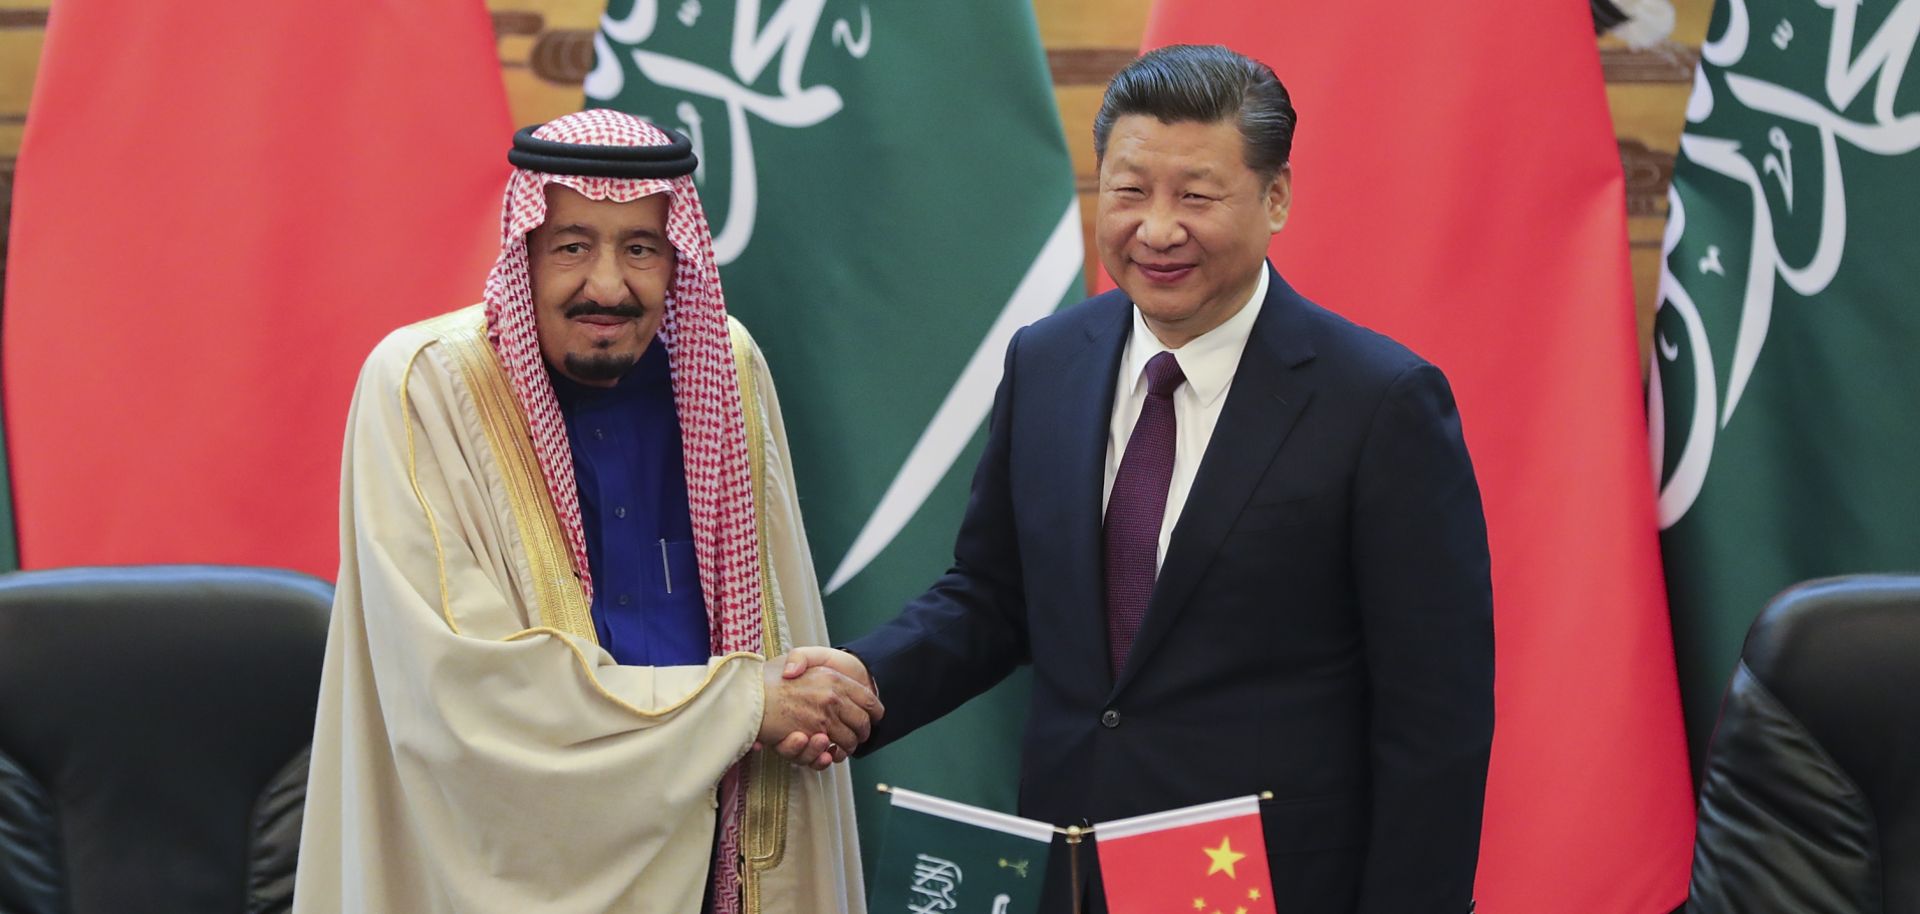 The photo shows Saudi King Salman shaking hands with Chinese President Xi Jinping during a signing ceremony in Beijing on March 16, 2017.